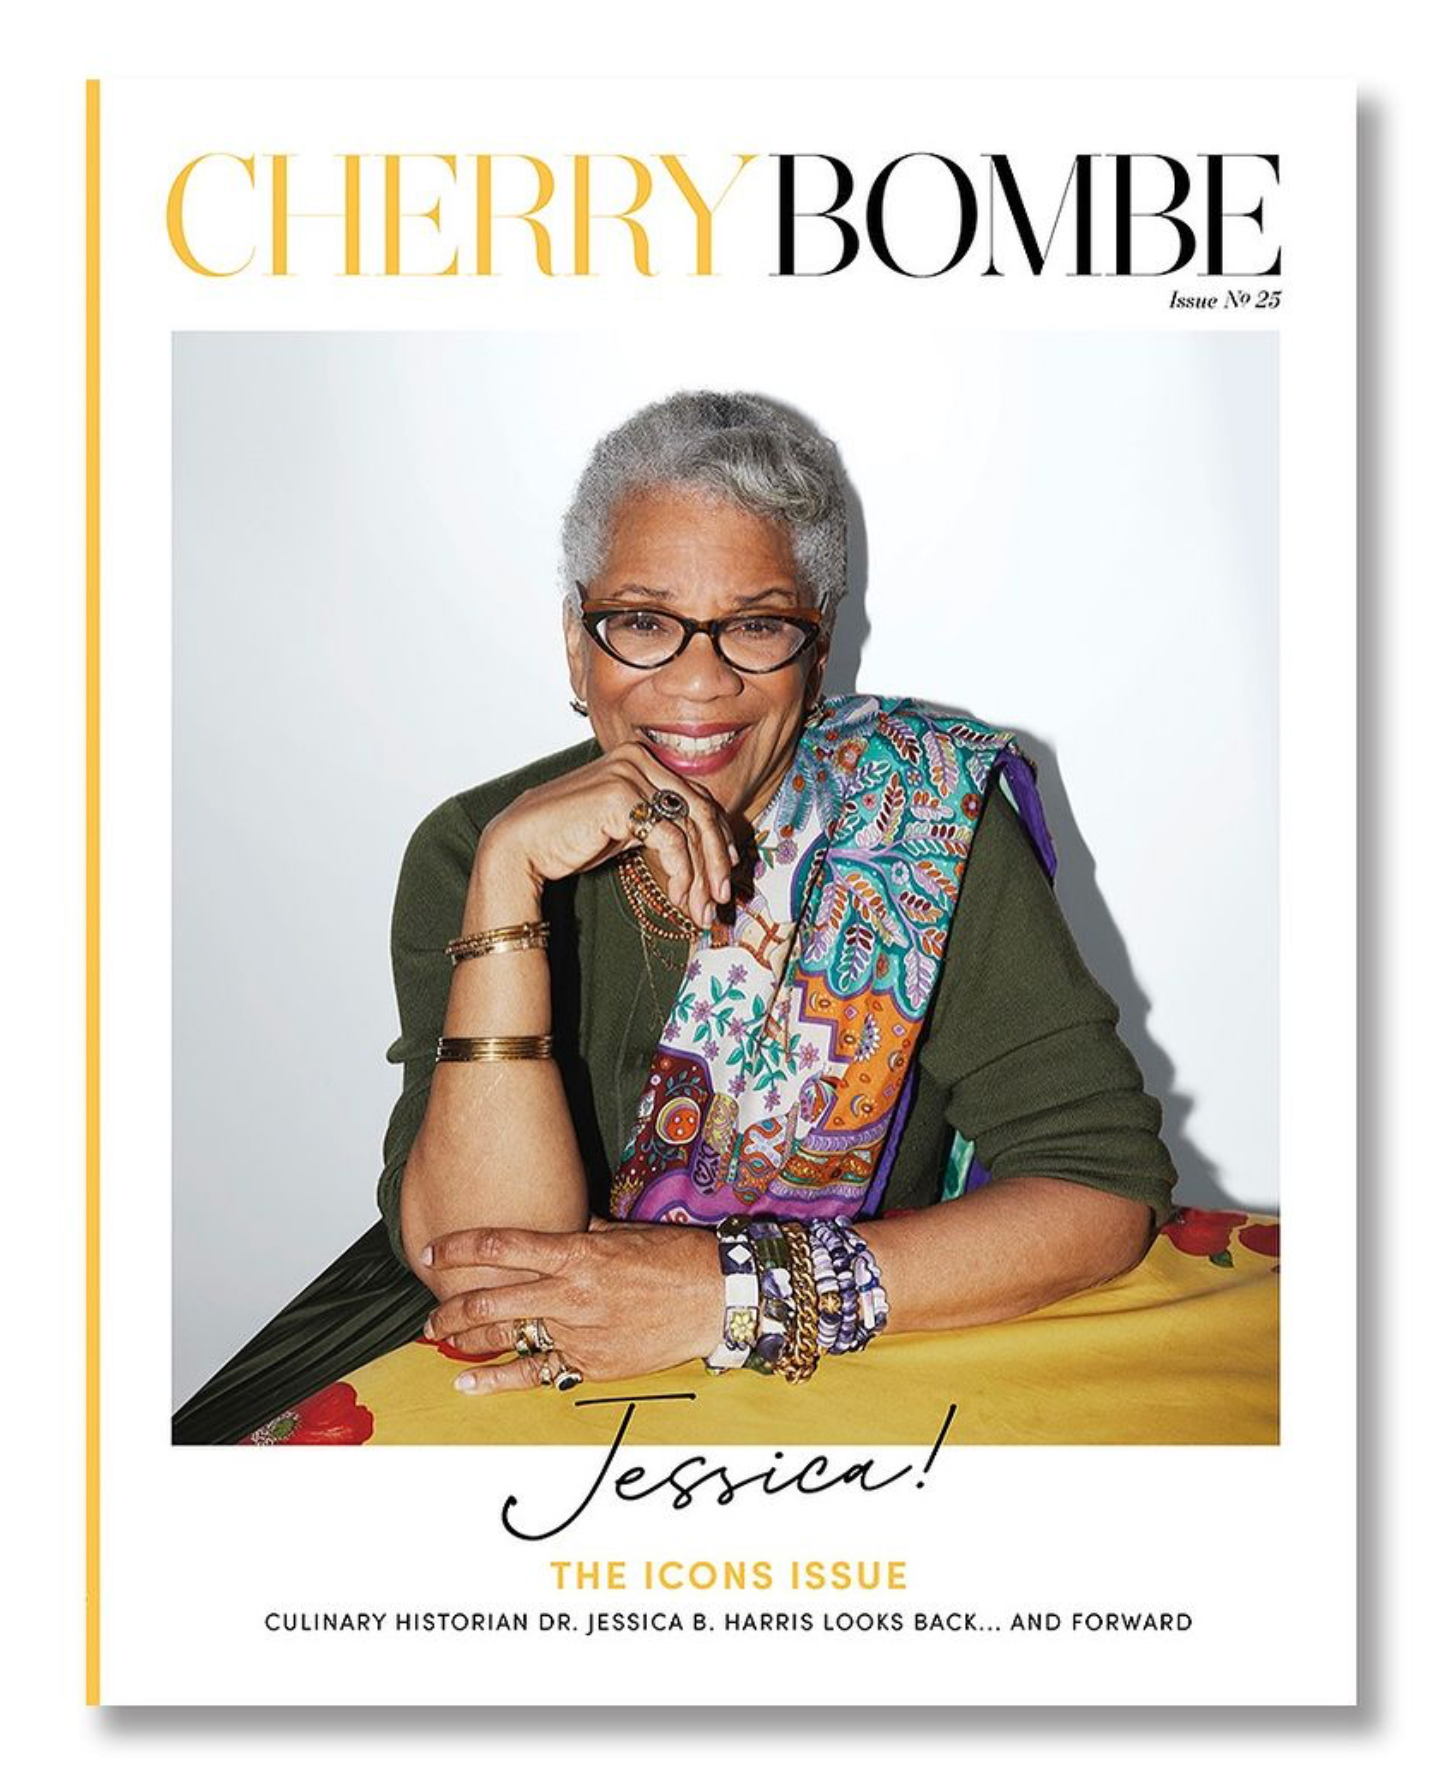 Cherry Bombe Issue Nº 25: The Icons Issue — Dr. Jessica B. Harris